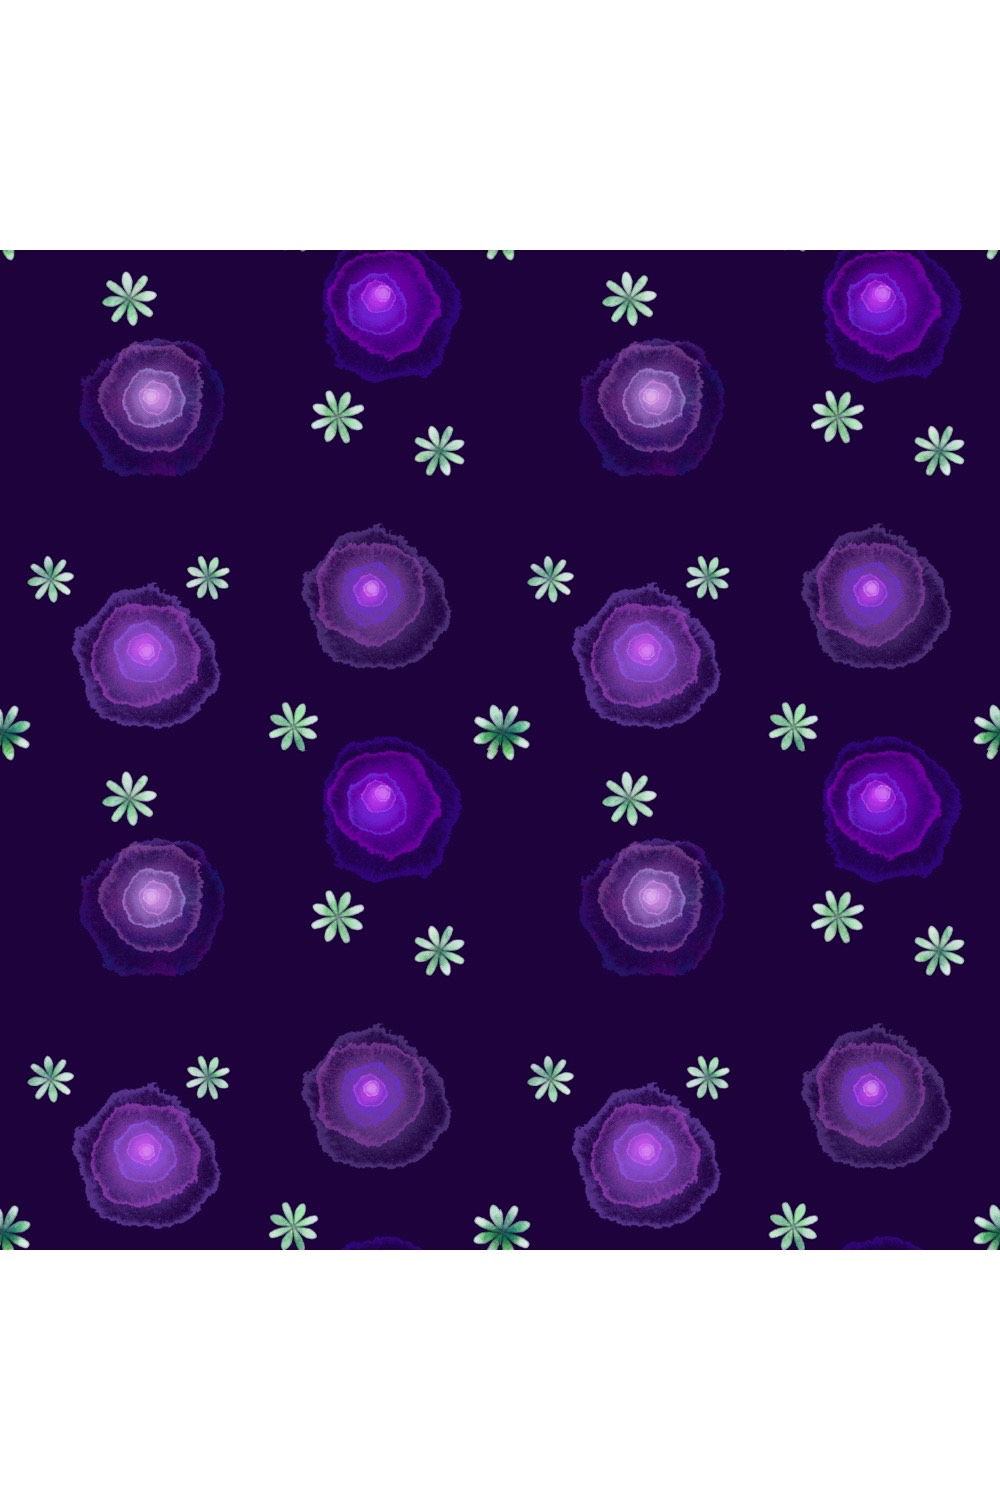 Jellyfish flowers pattern pinterest preview image.